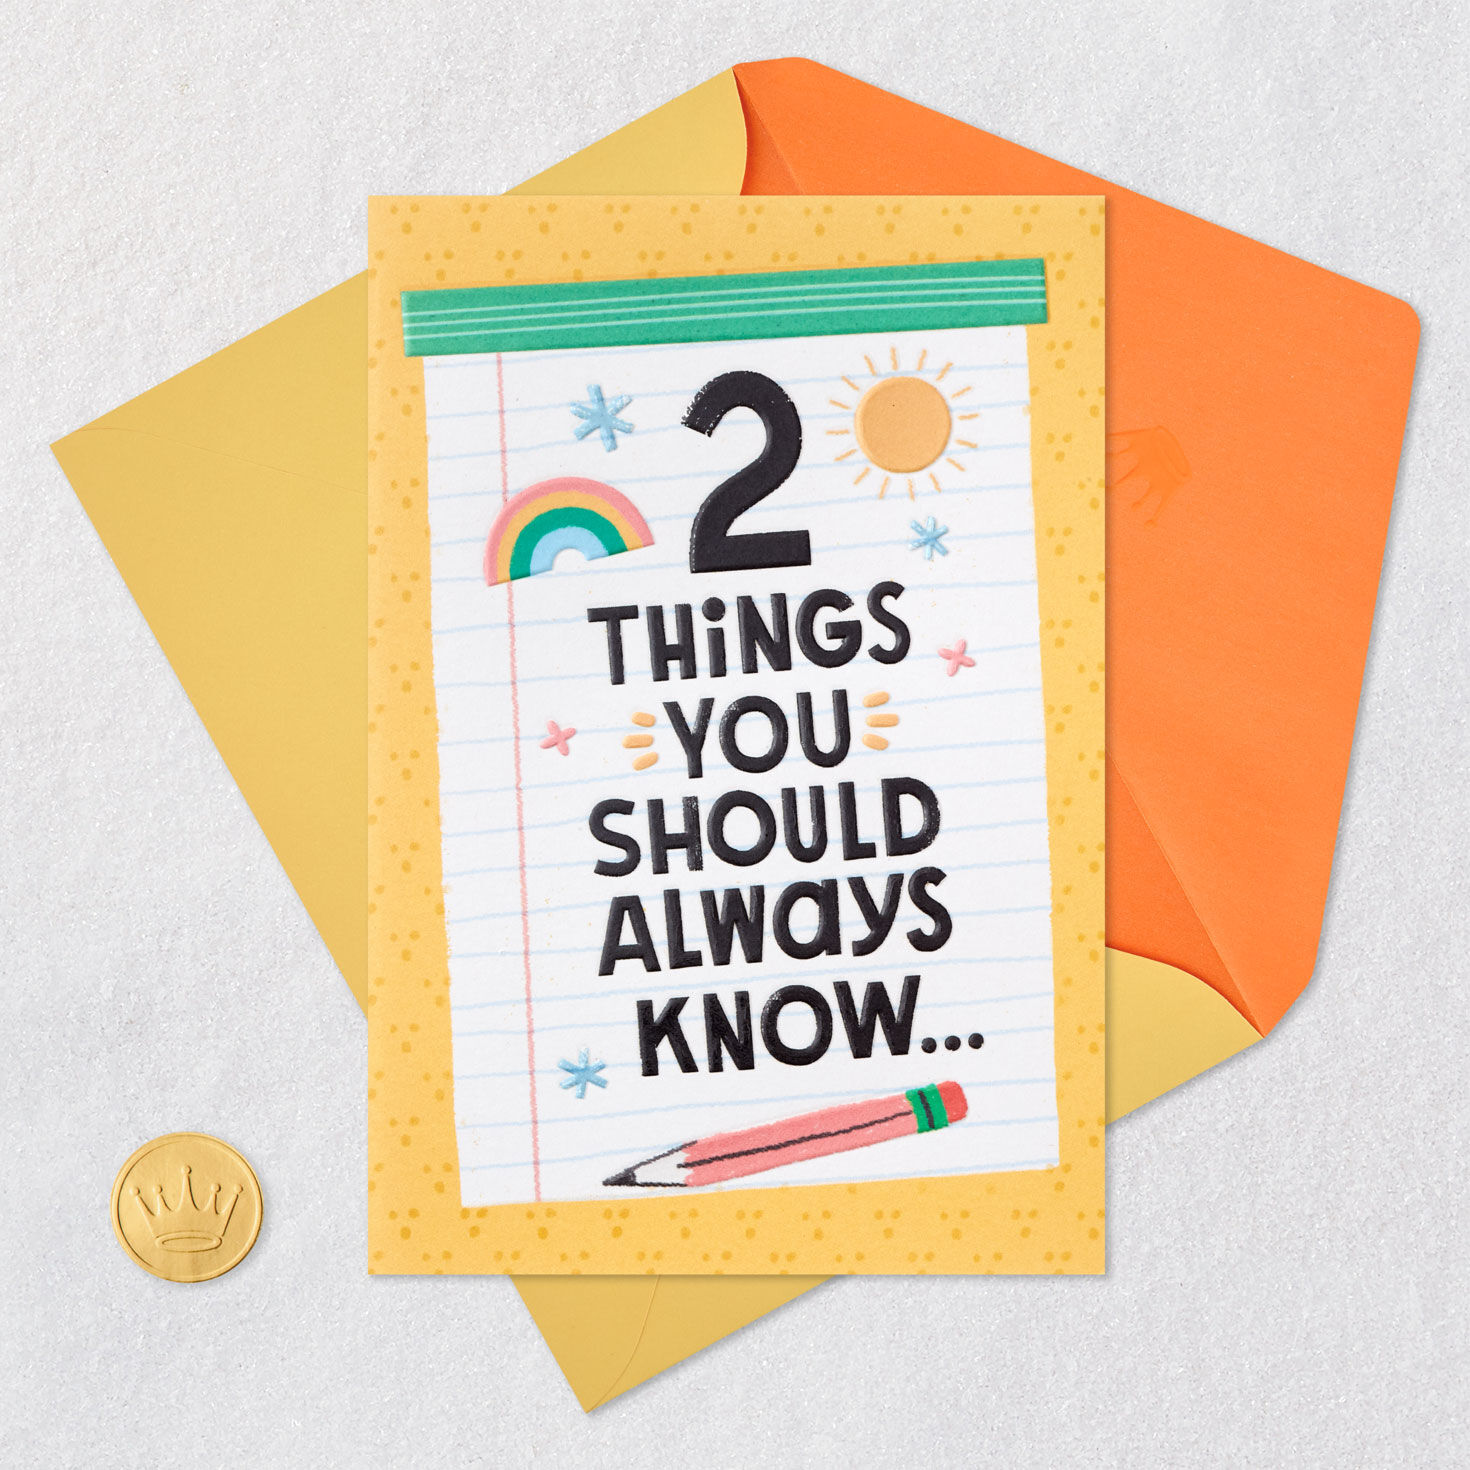 Little World Changers™ Loved and Amazing Kid Card for only USD 2.99 | Hallmark